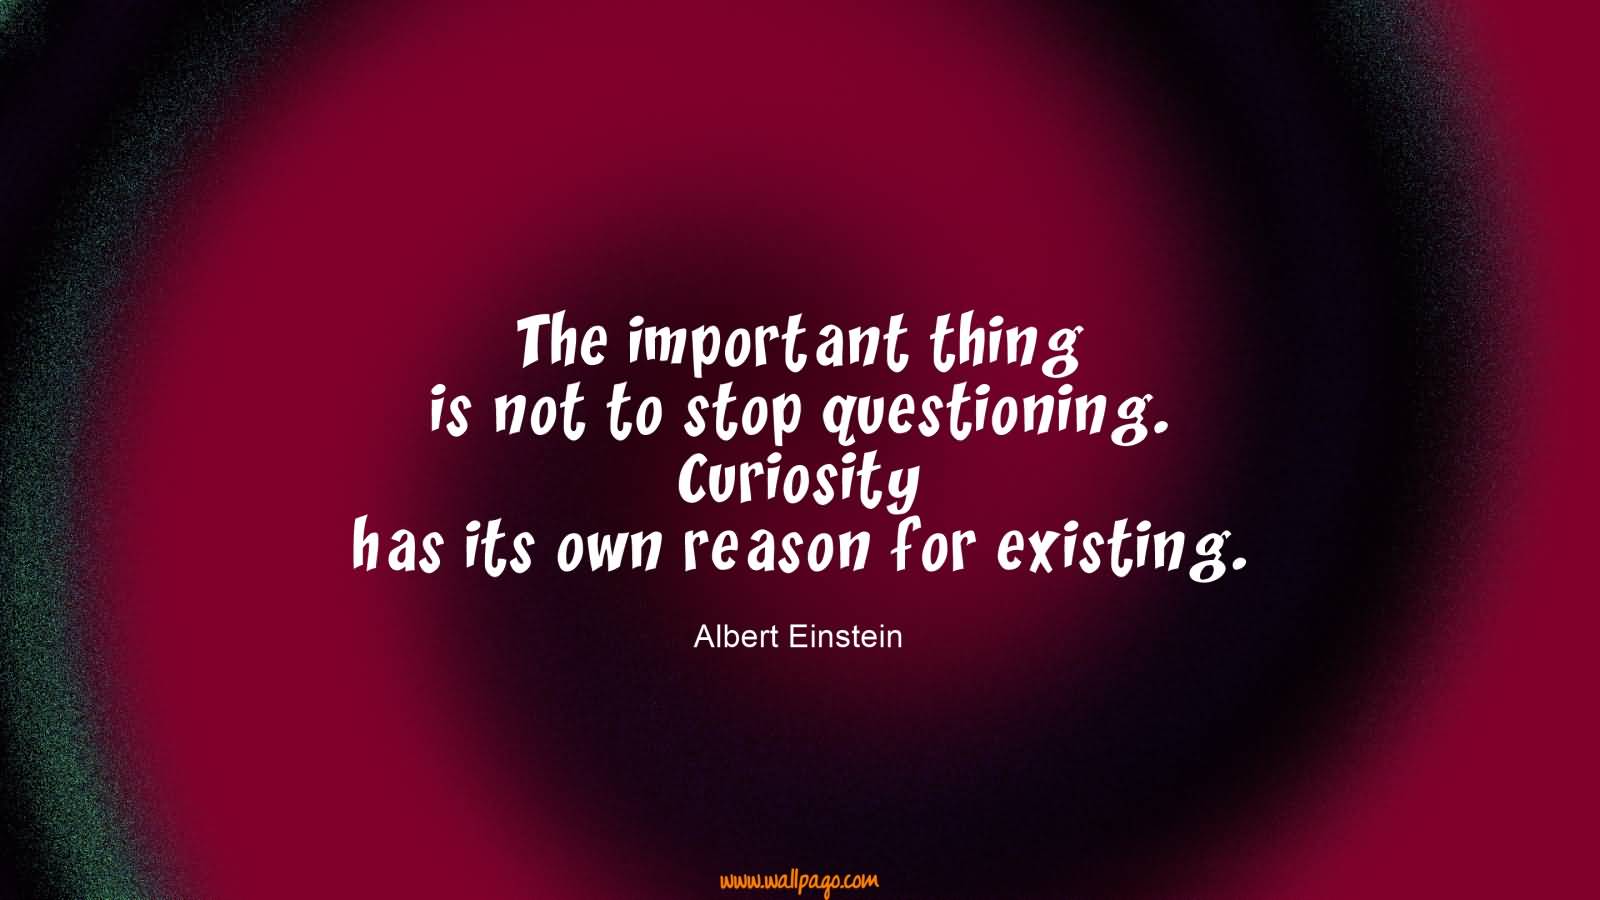 The important thing is not to stop questioning. Curiosity has its own reason for existing - Albert Einstein2 (2)